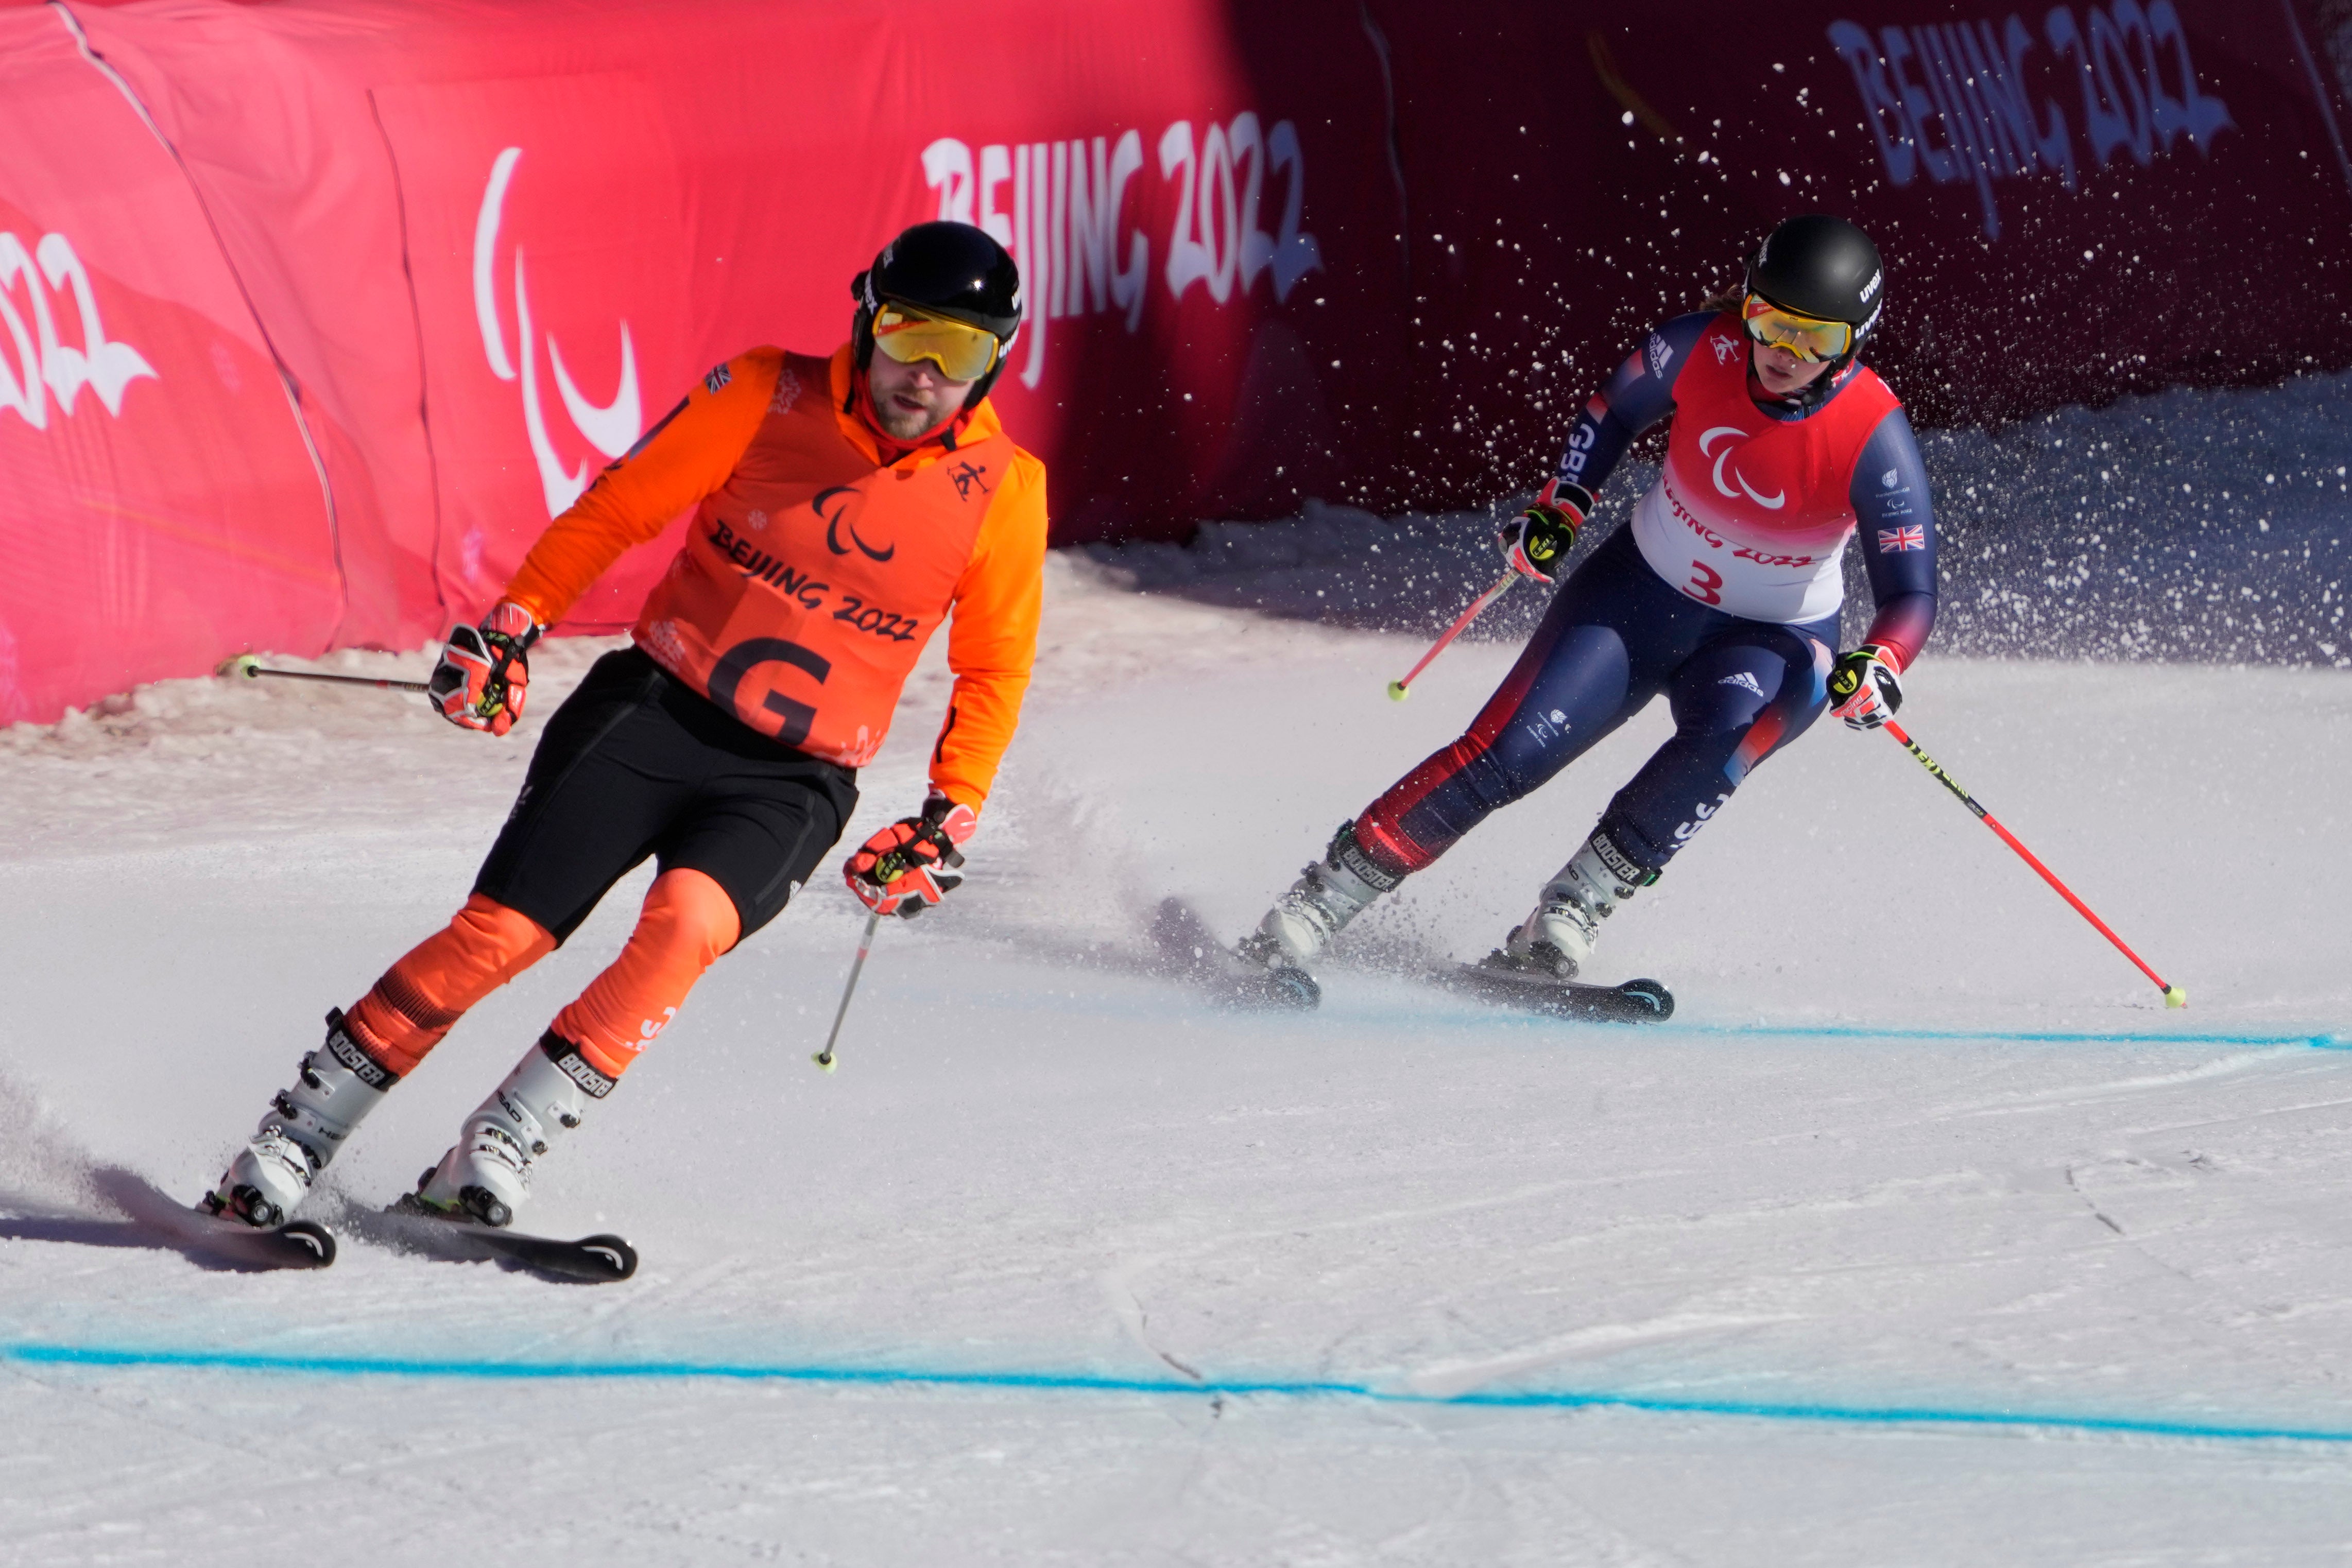 Brett Wild guides Millie Knight during the super-G event